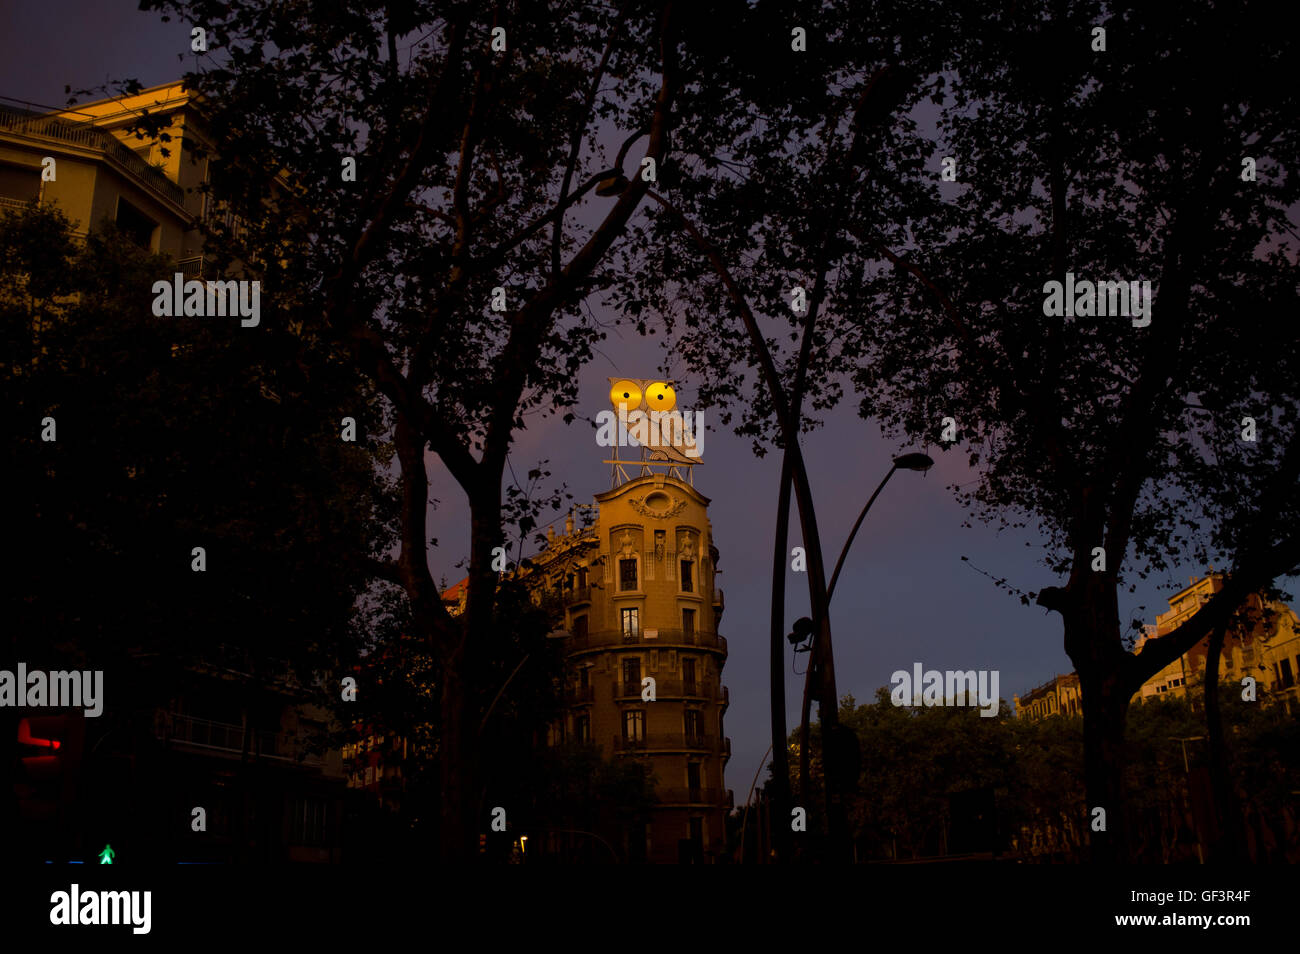 Barcelona, Catalonia, Spain. 27th July, 2016. El Mussol (The Owl in catalan), an ancient ad sign, rests atop of a building of the Eixample distrcit of Barcelona as the sun sets. For years The Owl was an advertising claim by Rotulos Roura and is a historical reference of the signs that were placed in the early 1970s in the city. In 2004 was pardoned and restored when all obsolete ad signs were removed under the Ordenança d'Usos del Paisatge Urba (Ordinance Uses Urban Landscape) by Barcelona's City Hall. The Owl was considered part of the collective memory of Barcelona, and it can be conside Stock Photo